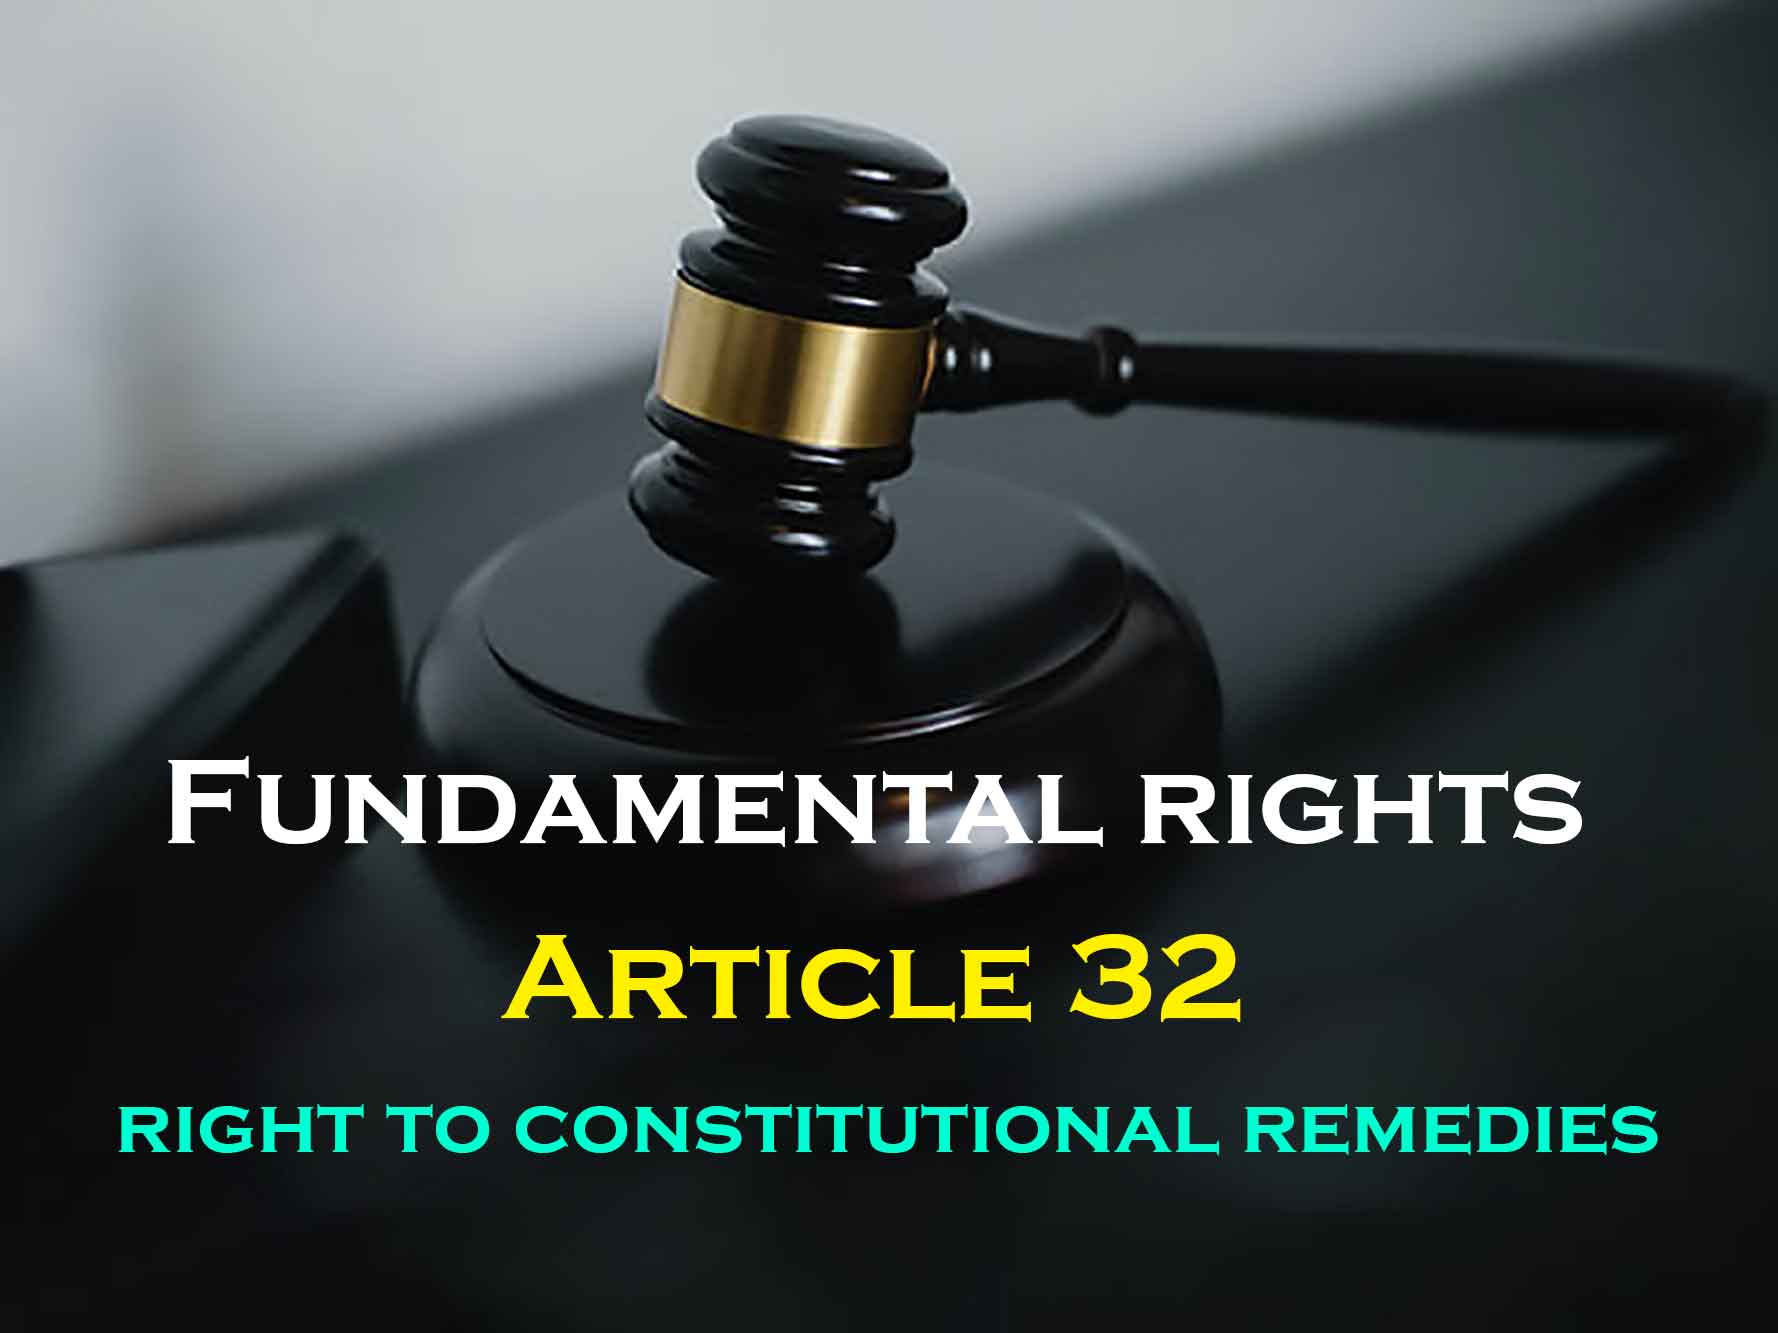 Article 32 – Right to Constitutional Remedies